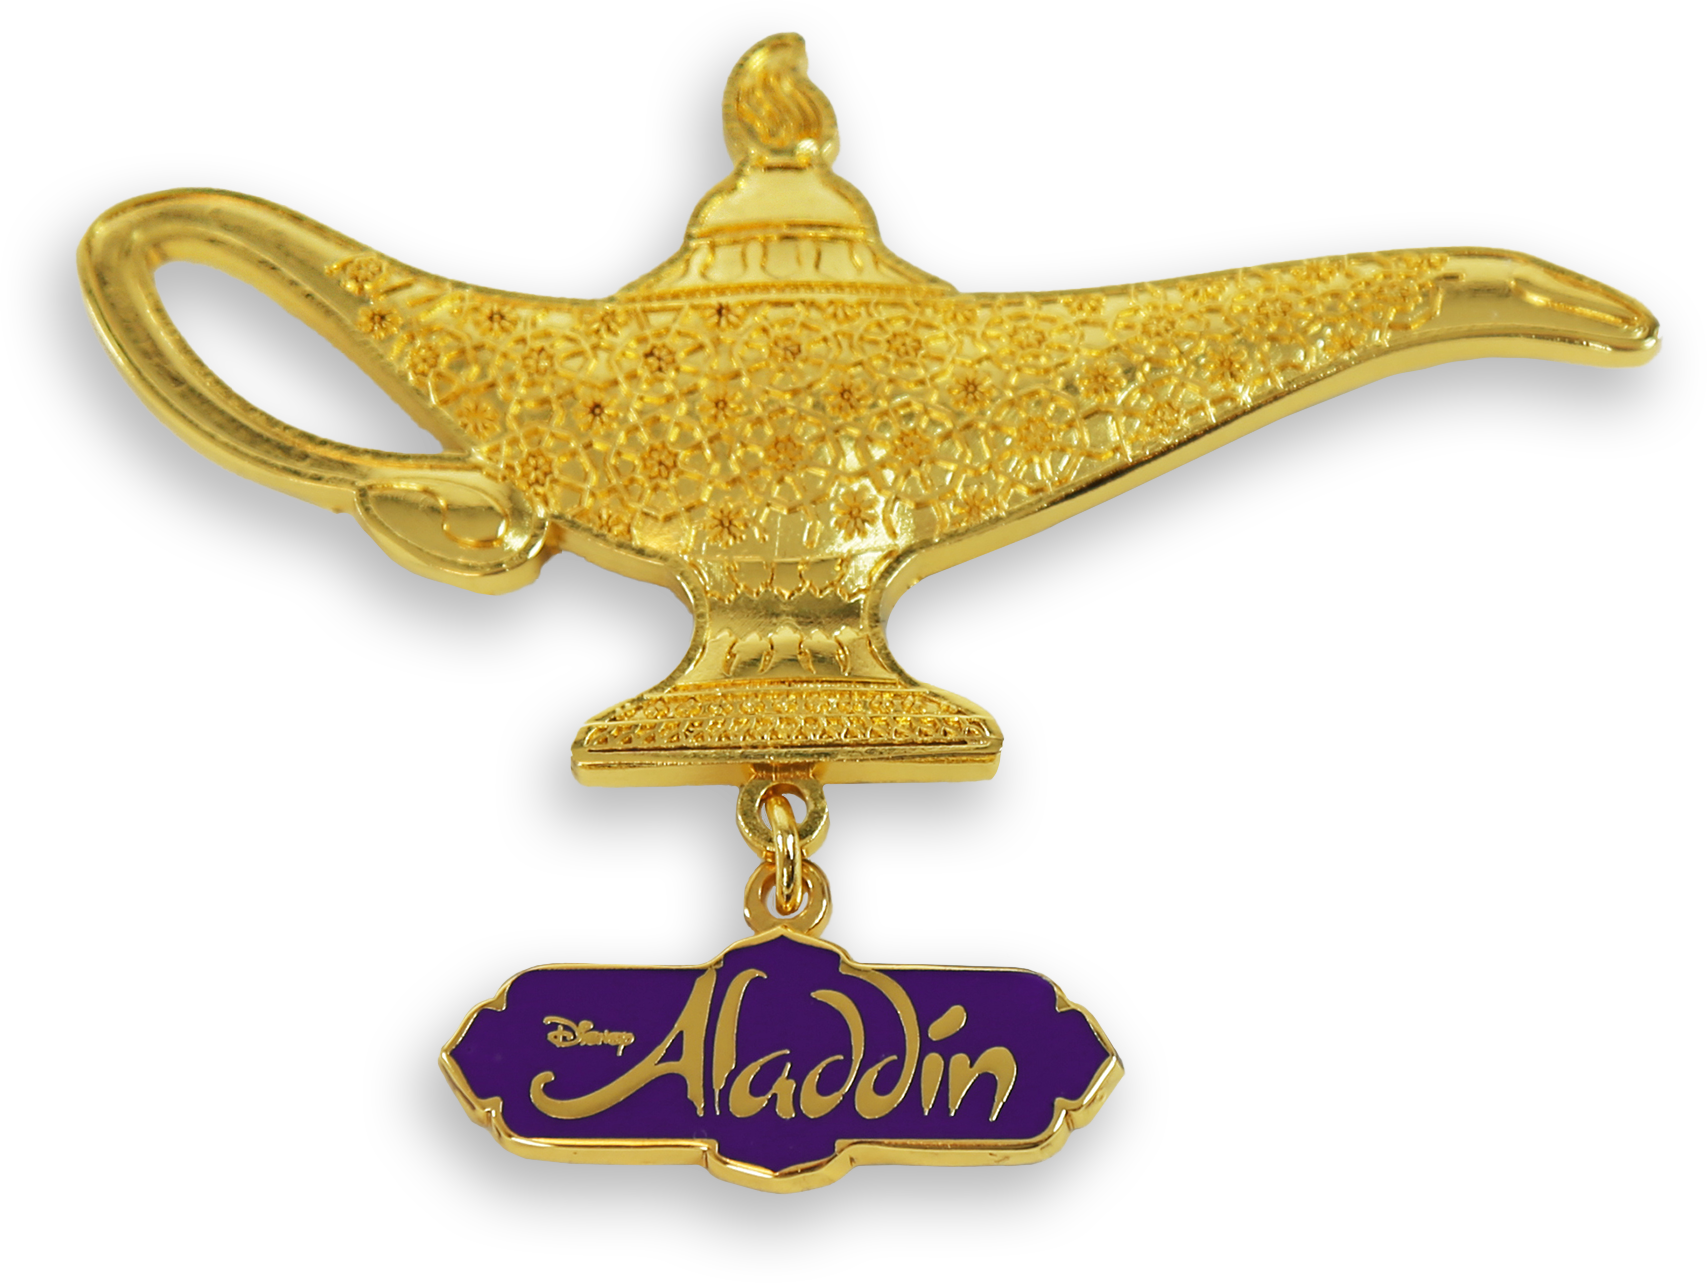 Aladdin the Broadway Musical - Lamp Magnet